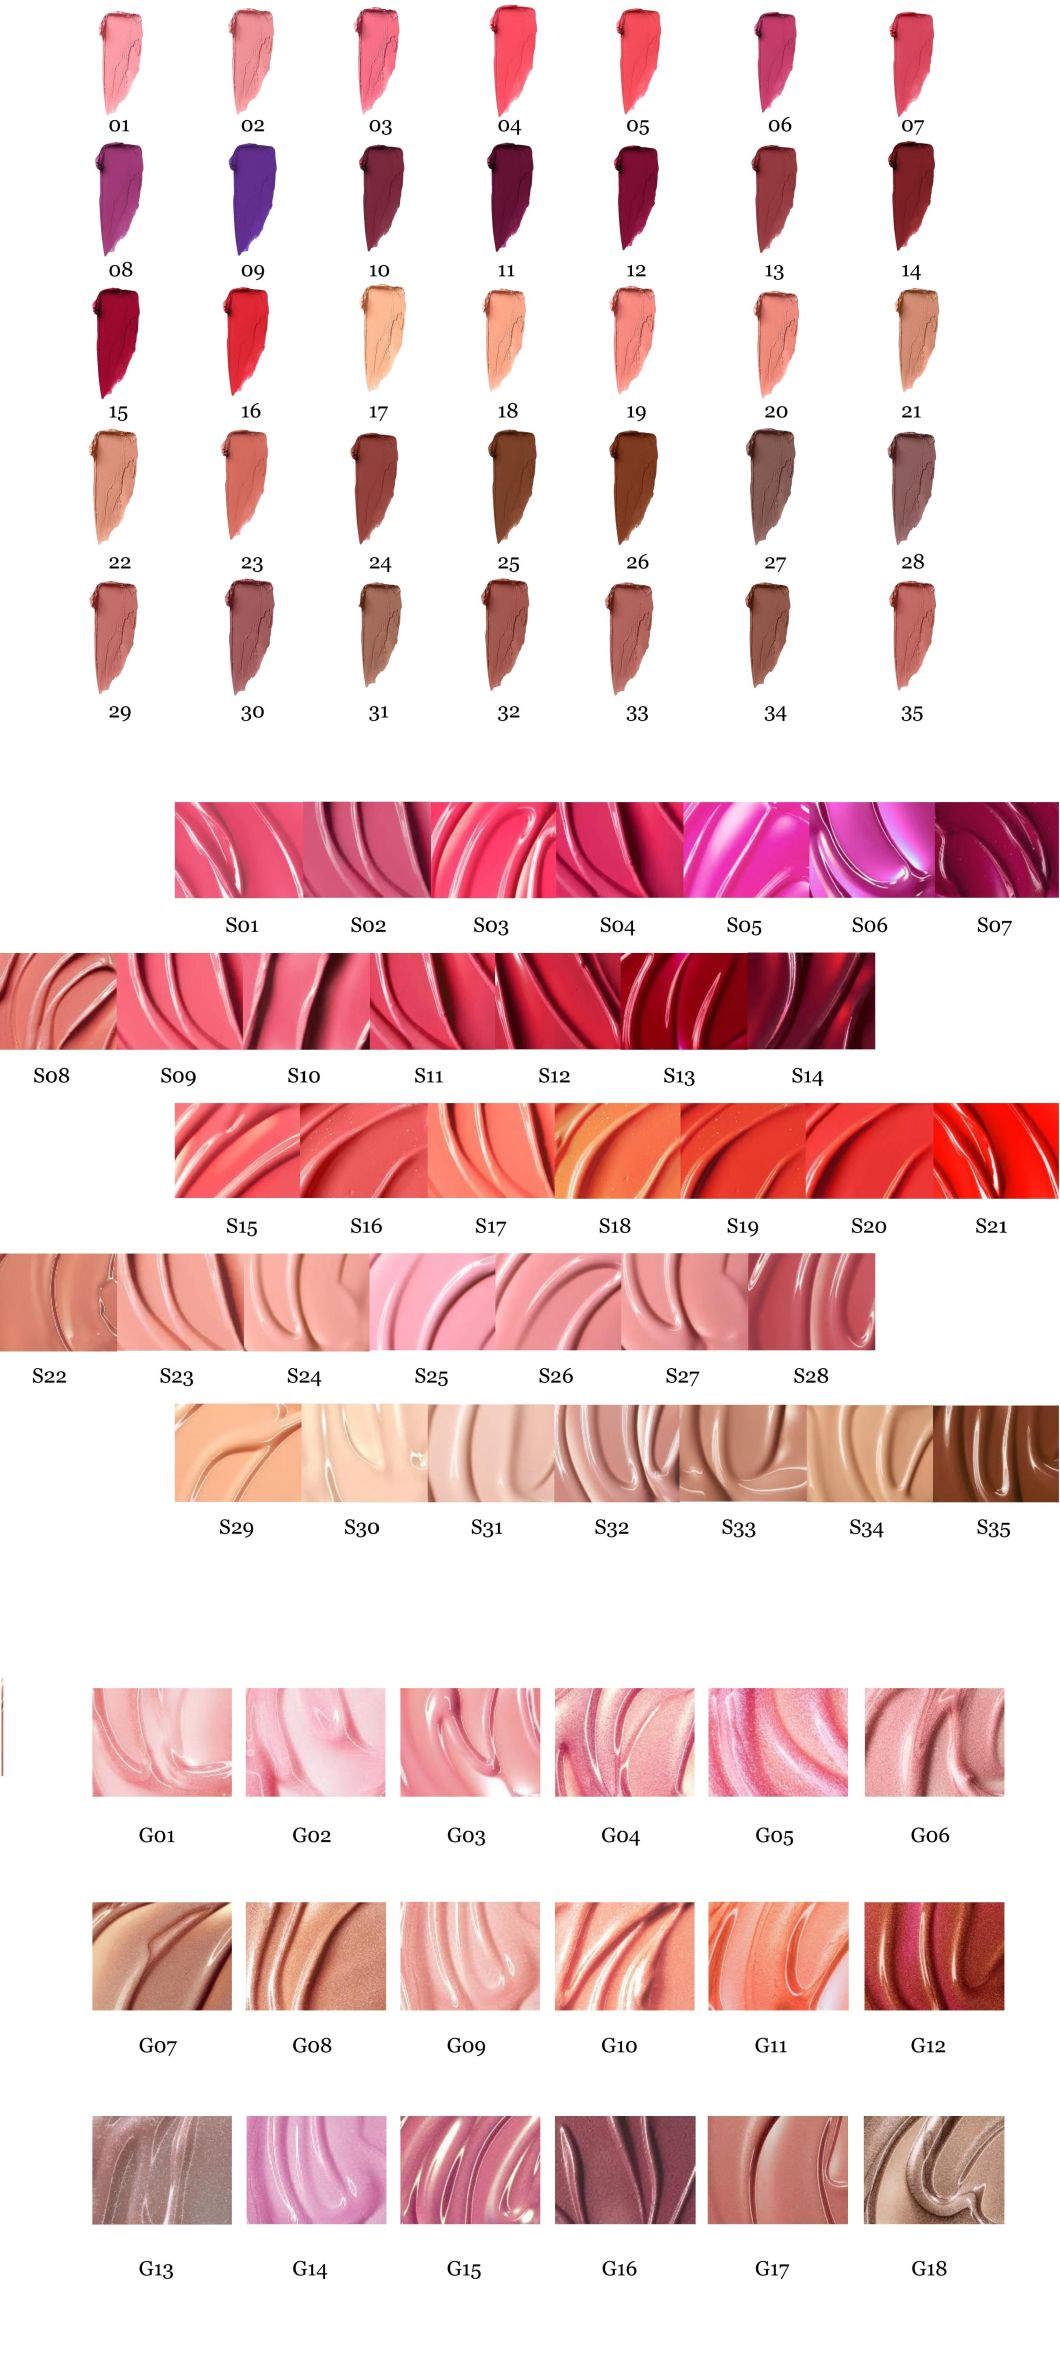 2019 Hot Sale Matte Lipstick Highly Pigmented Long Lasting Lipstick Cosmetics Makeup